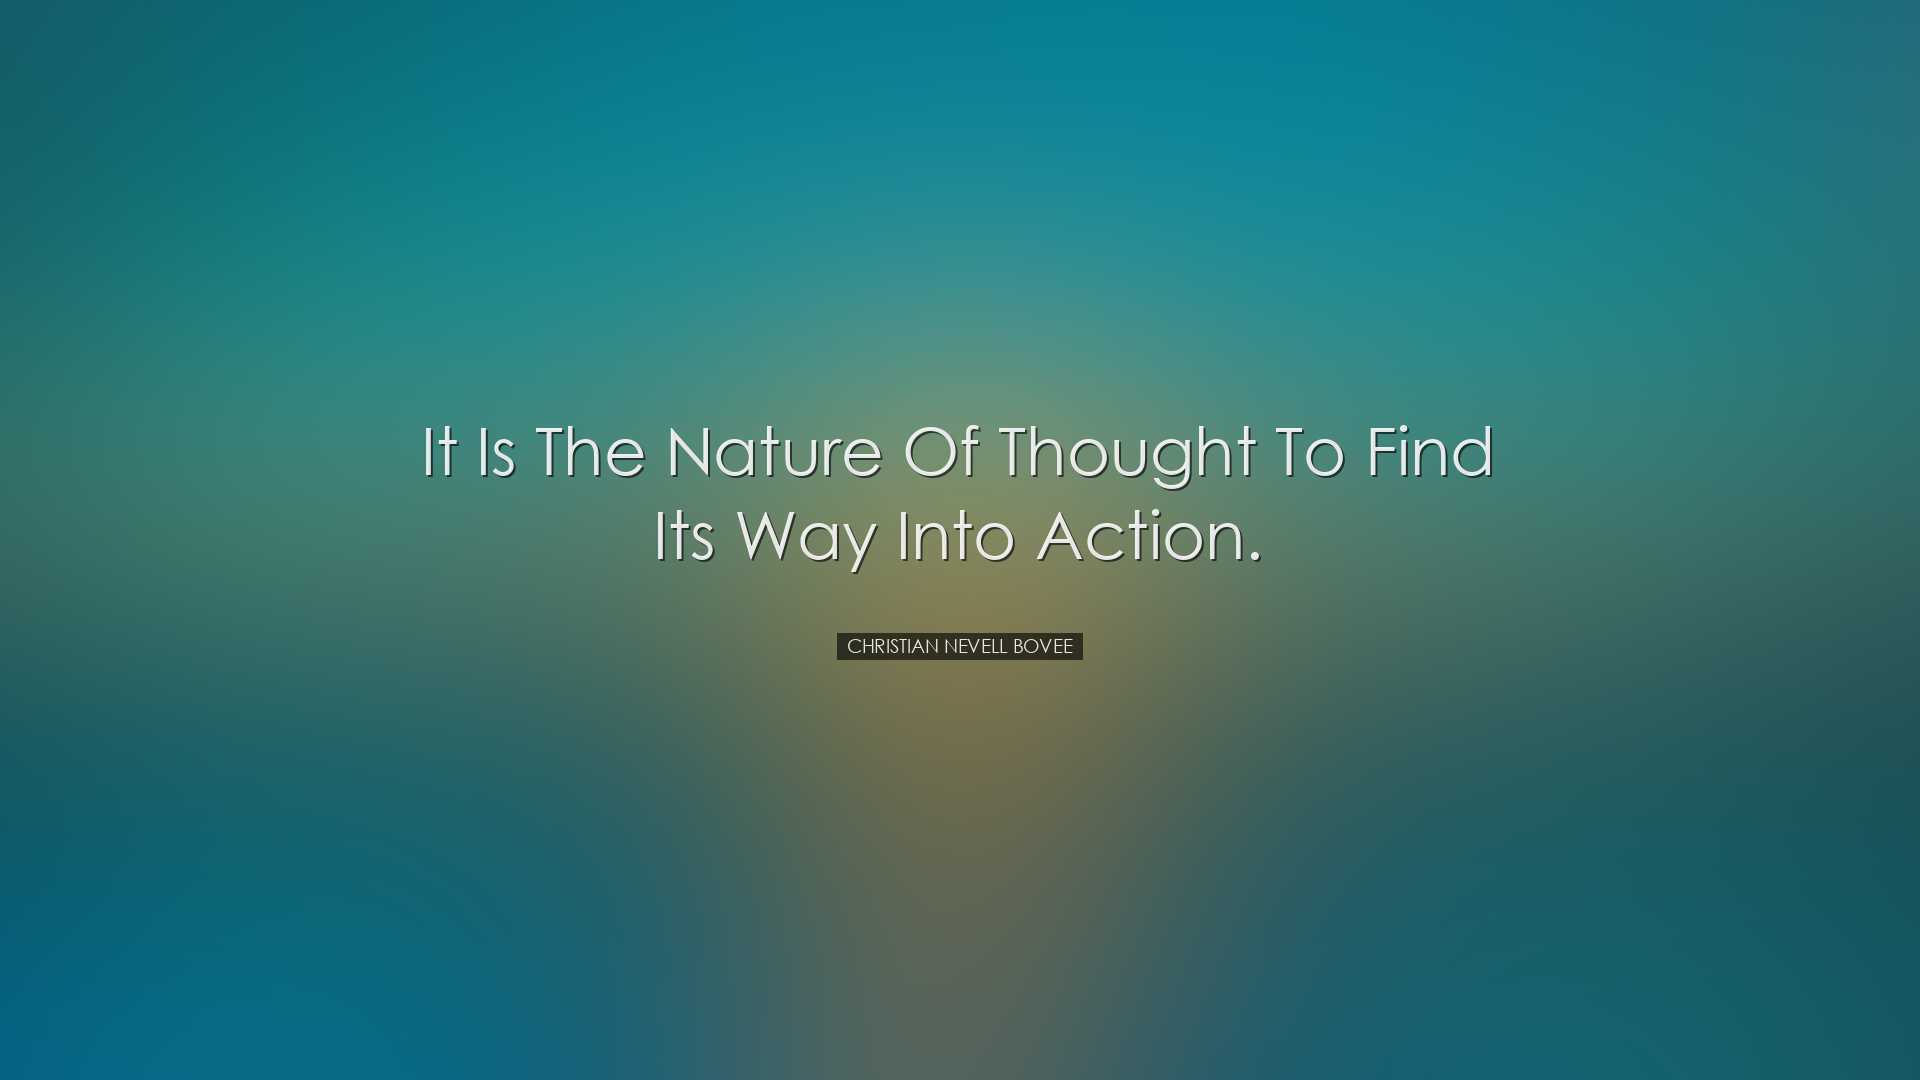 It is the nature of thought to find its way into action. - Christi